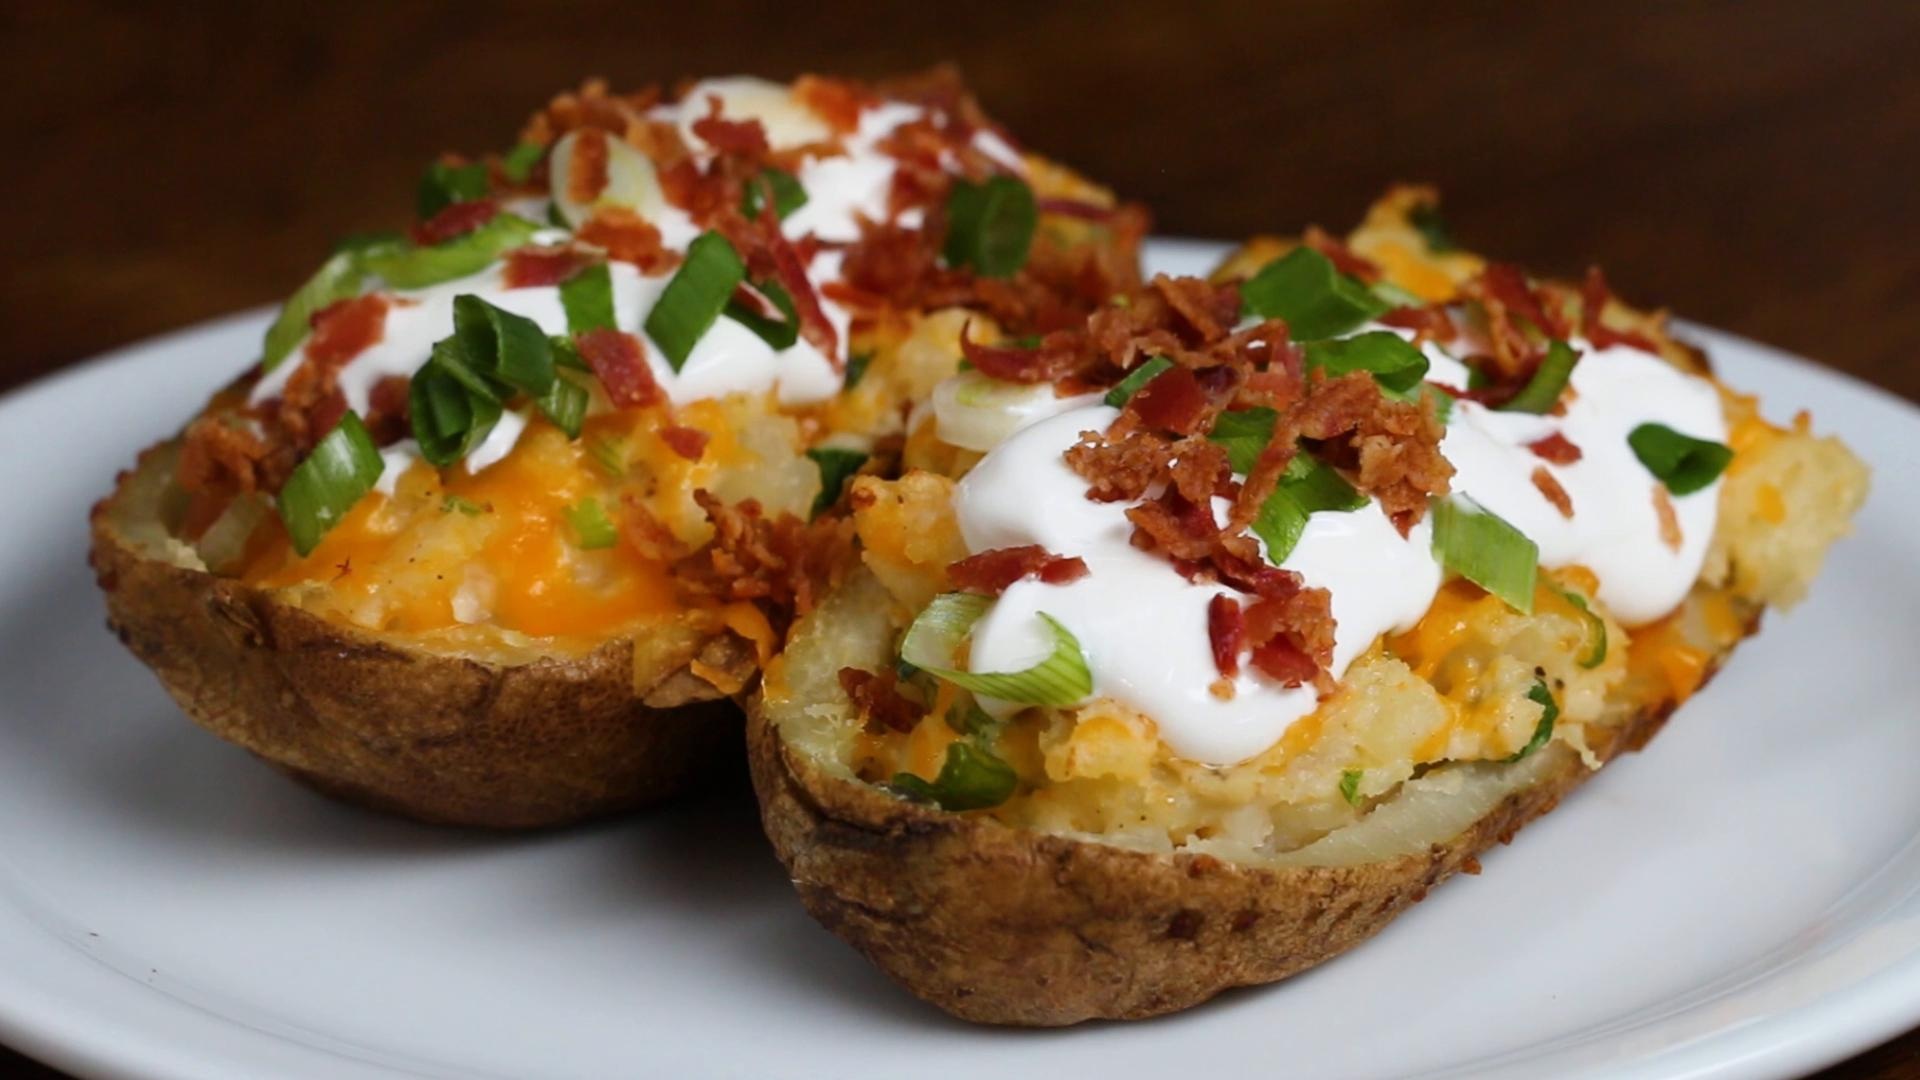 Twice baked potatoes, Loaded with toppings, Tasty and satisfying, Tasty recipe by Tasty, 1920x1080 Full HD Desktop